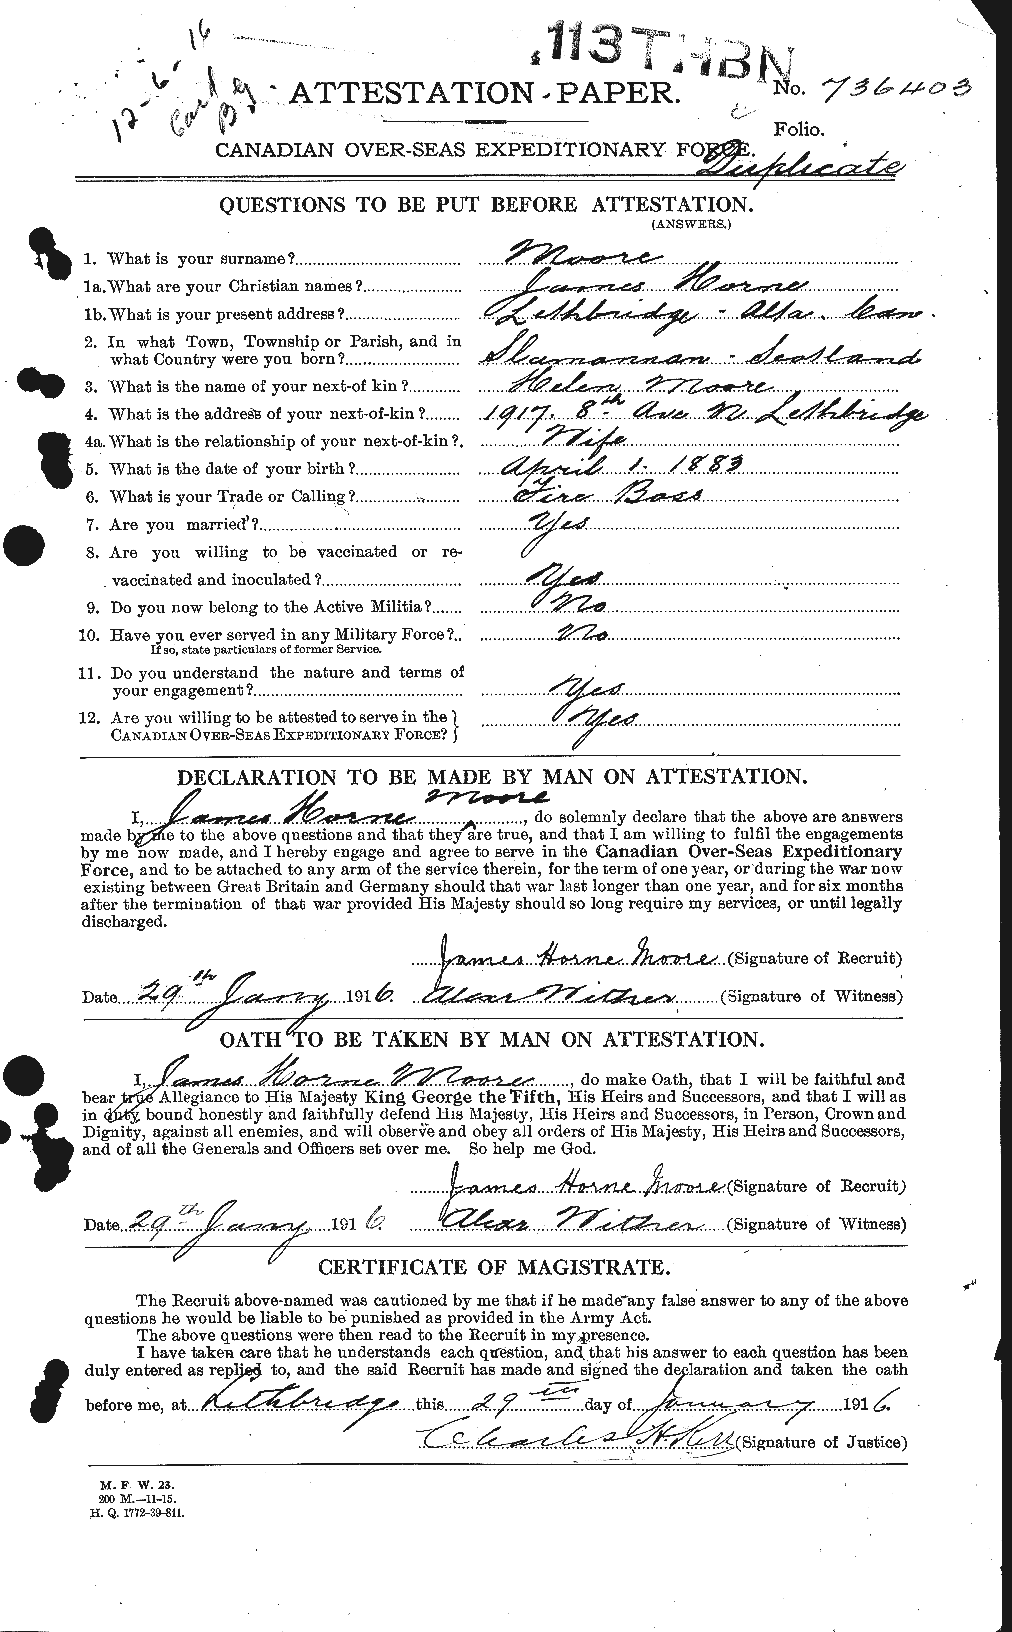 Personnel Records of the First World War - CEF 502224a